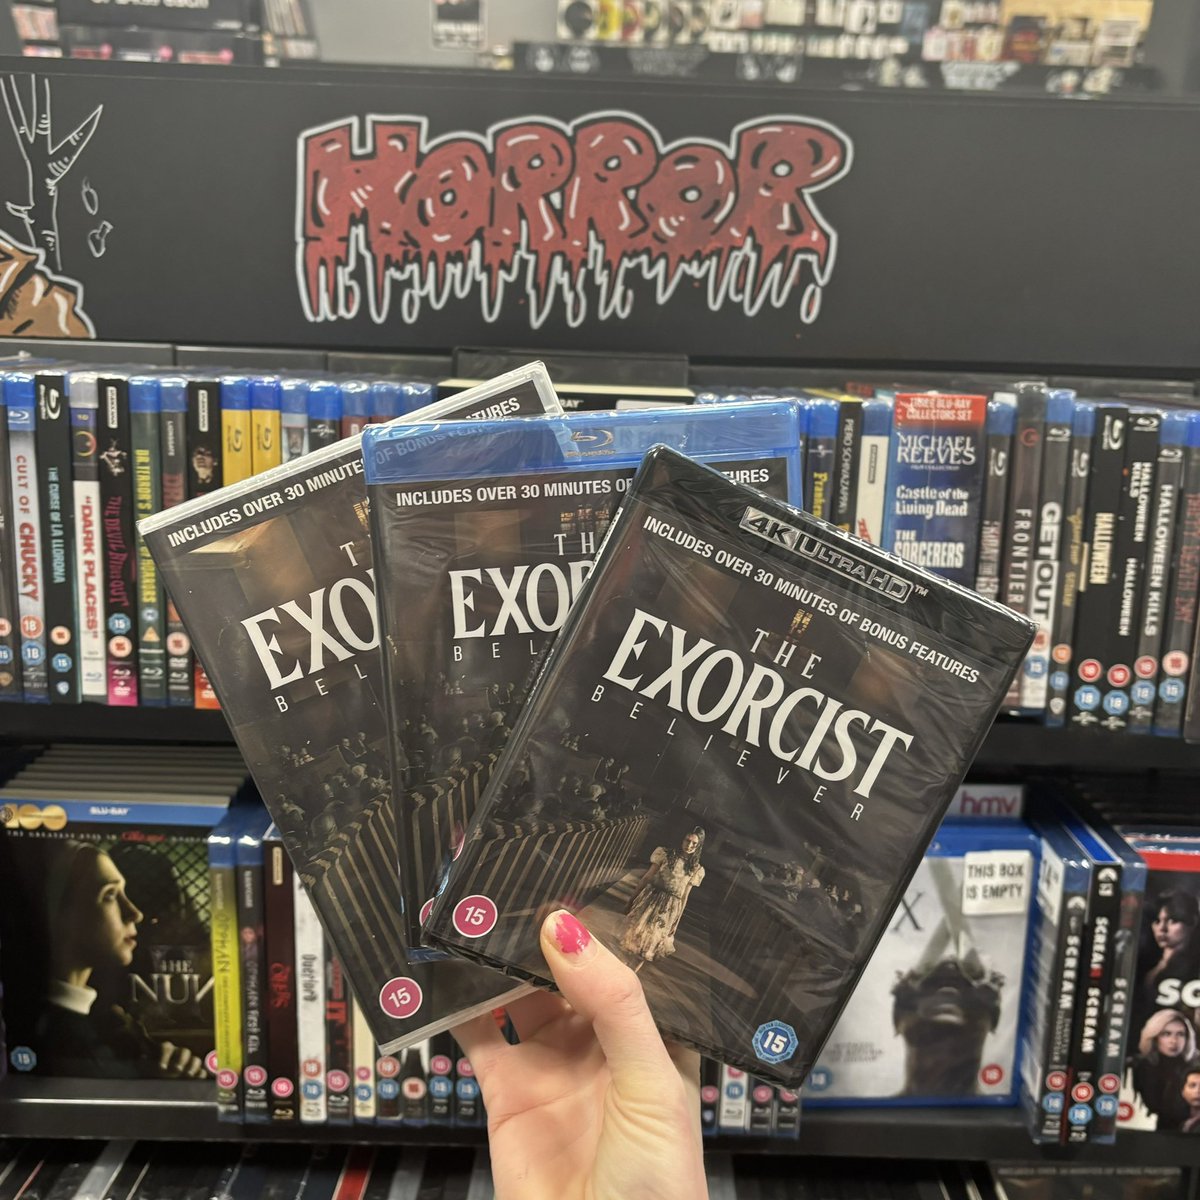 🍿 NEW RELEASE 🍿 

50 years after the original #Horror classic we have a terrifying new chapter The Exorcist: Believer 🧟‍♀️ 

Available on DVD, Blu Ray and 4K Ultra HD 😱 

#NewRelease #newreleasemonday #newhorror